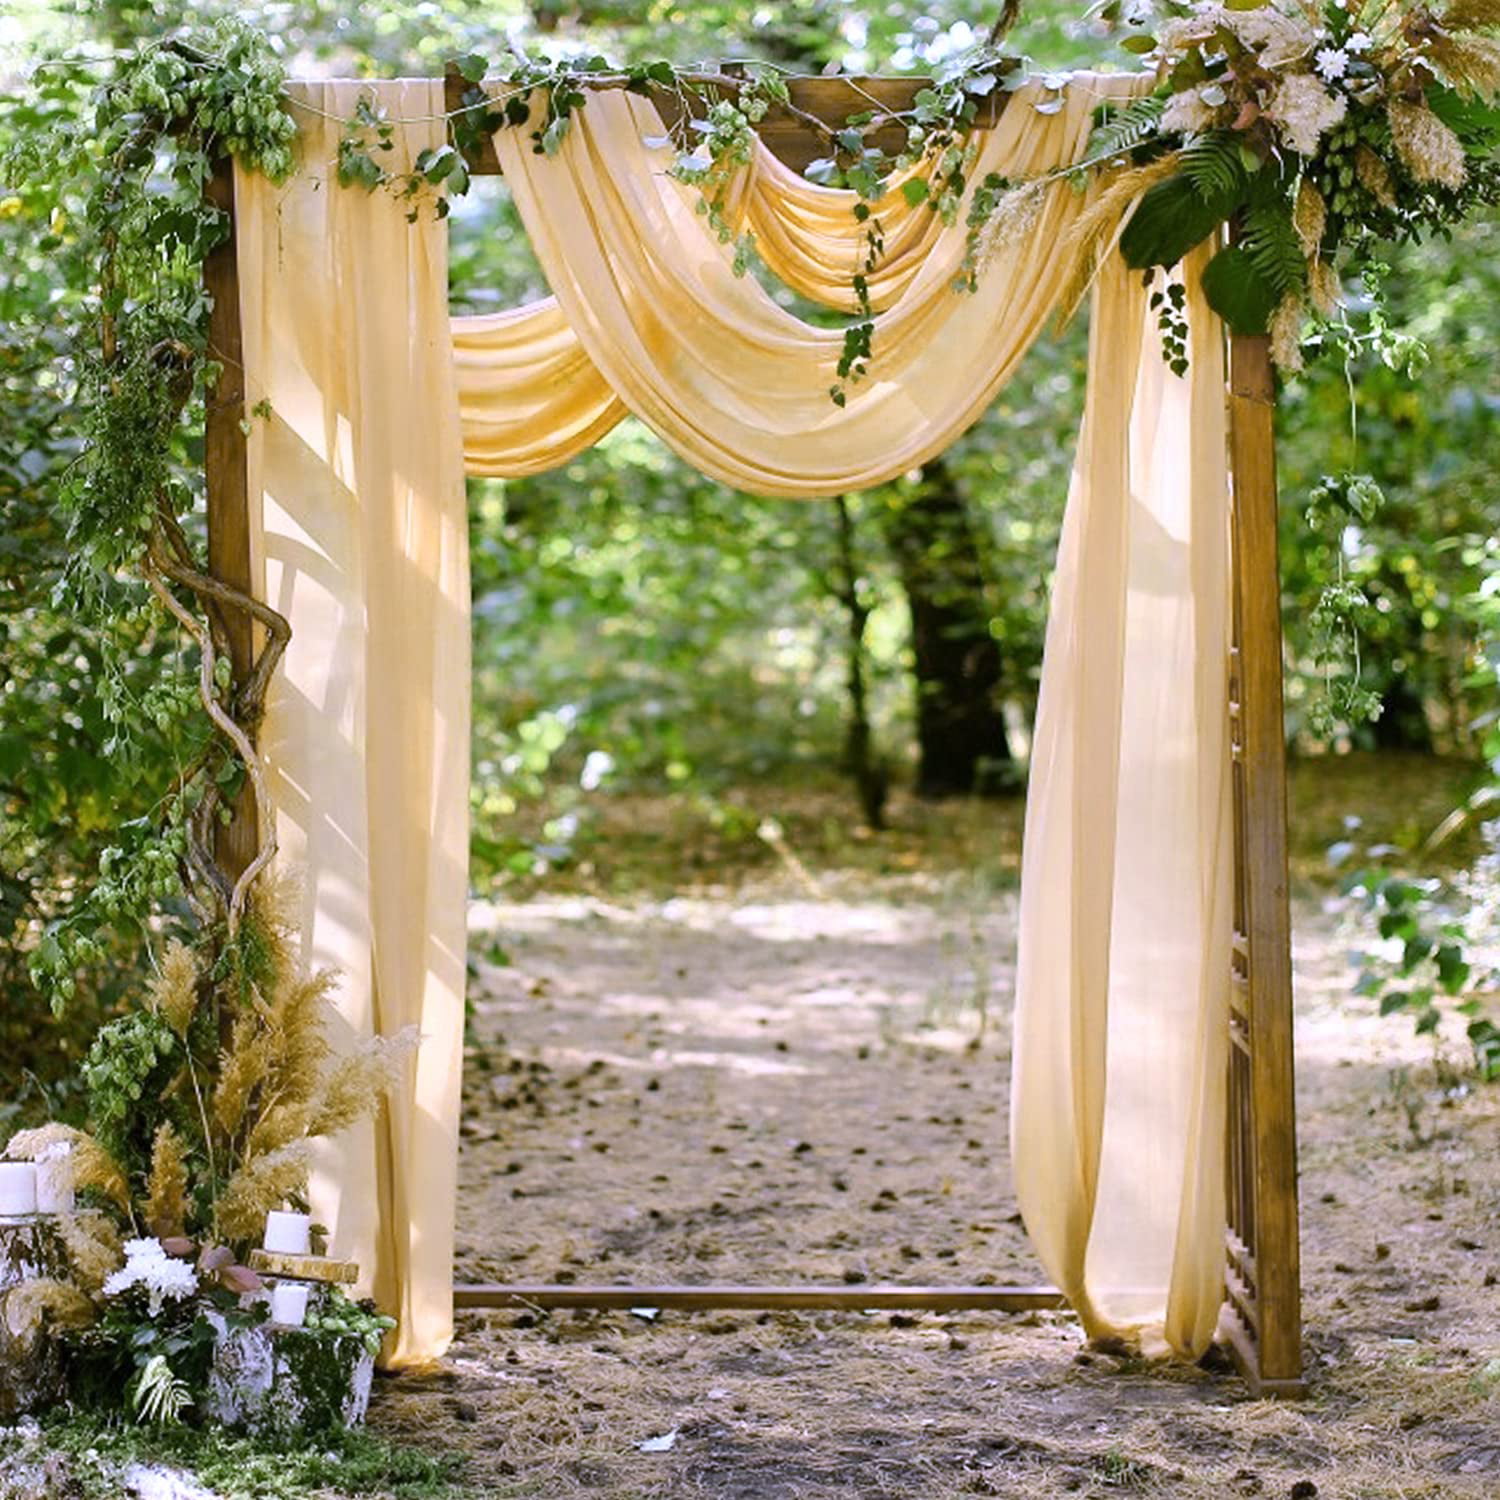 Wedding Arch Draping Fabric,2 Panels Terracotta Tulle Ceiling Backdrop  Curtain for Wedding Bridal Ceremony Party Celebration Backdrop Decoration  19Ft length x 28 width Drapes(2 Panels) Terracotta